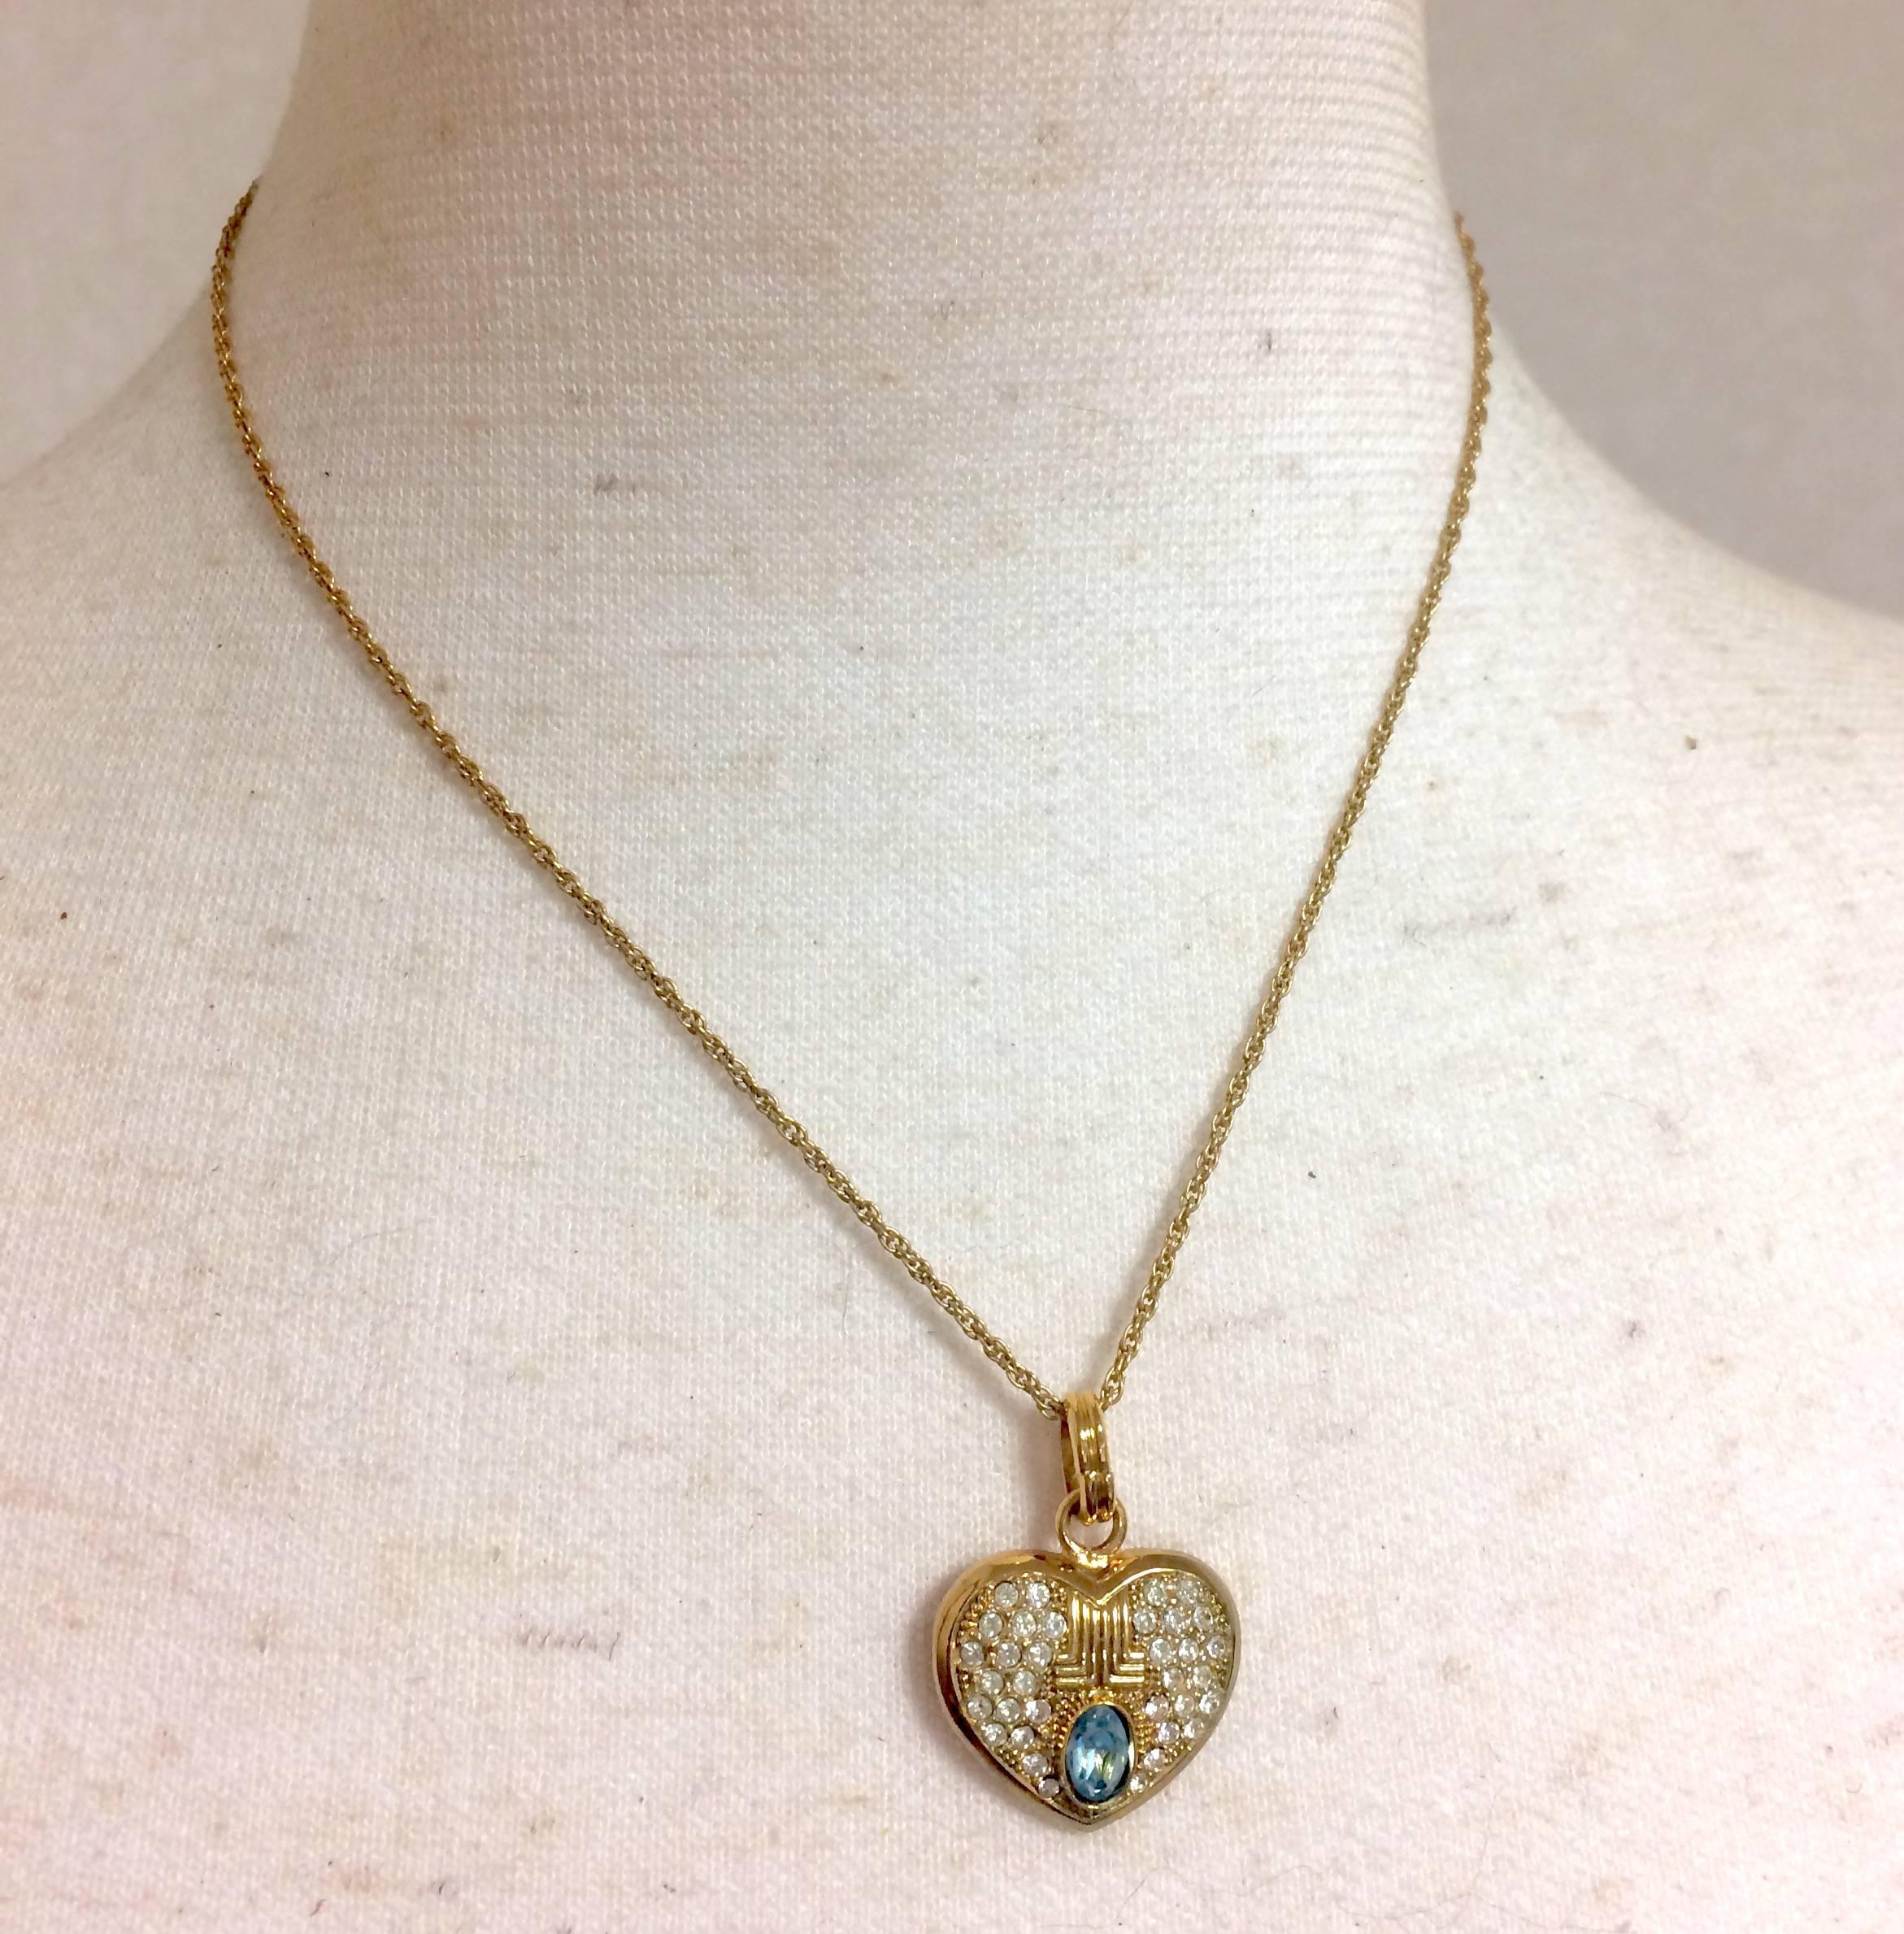 1980s. Vintage LANVIN golden skinny chain necklace with heart logo charm pendant top with clear crystals and blue crystal. Perfect jewelry gift.

This is a vintage gold-tone necklace with clear crystal and blue stone pendant top from LANVIN back in